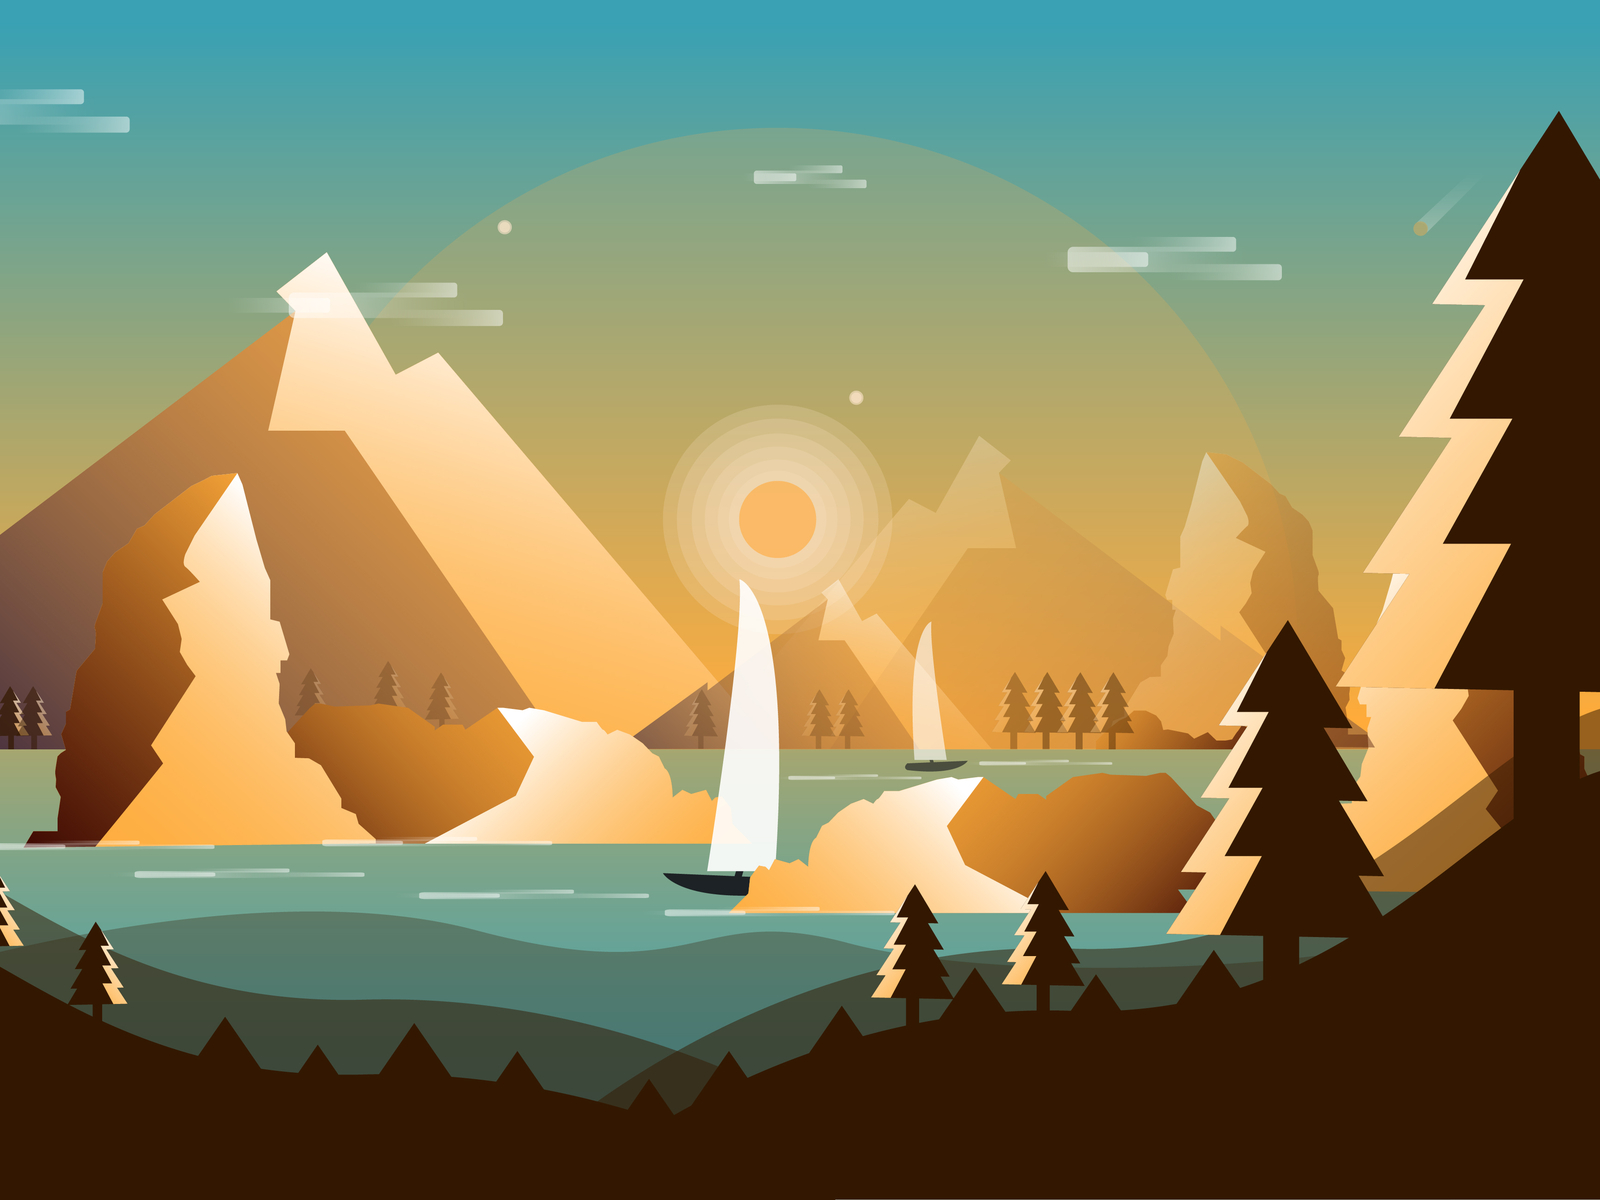 Mountain in Afternoon by Fajar Haiqal on Dribbble